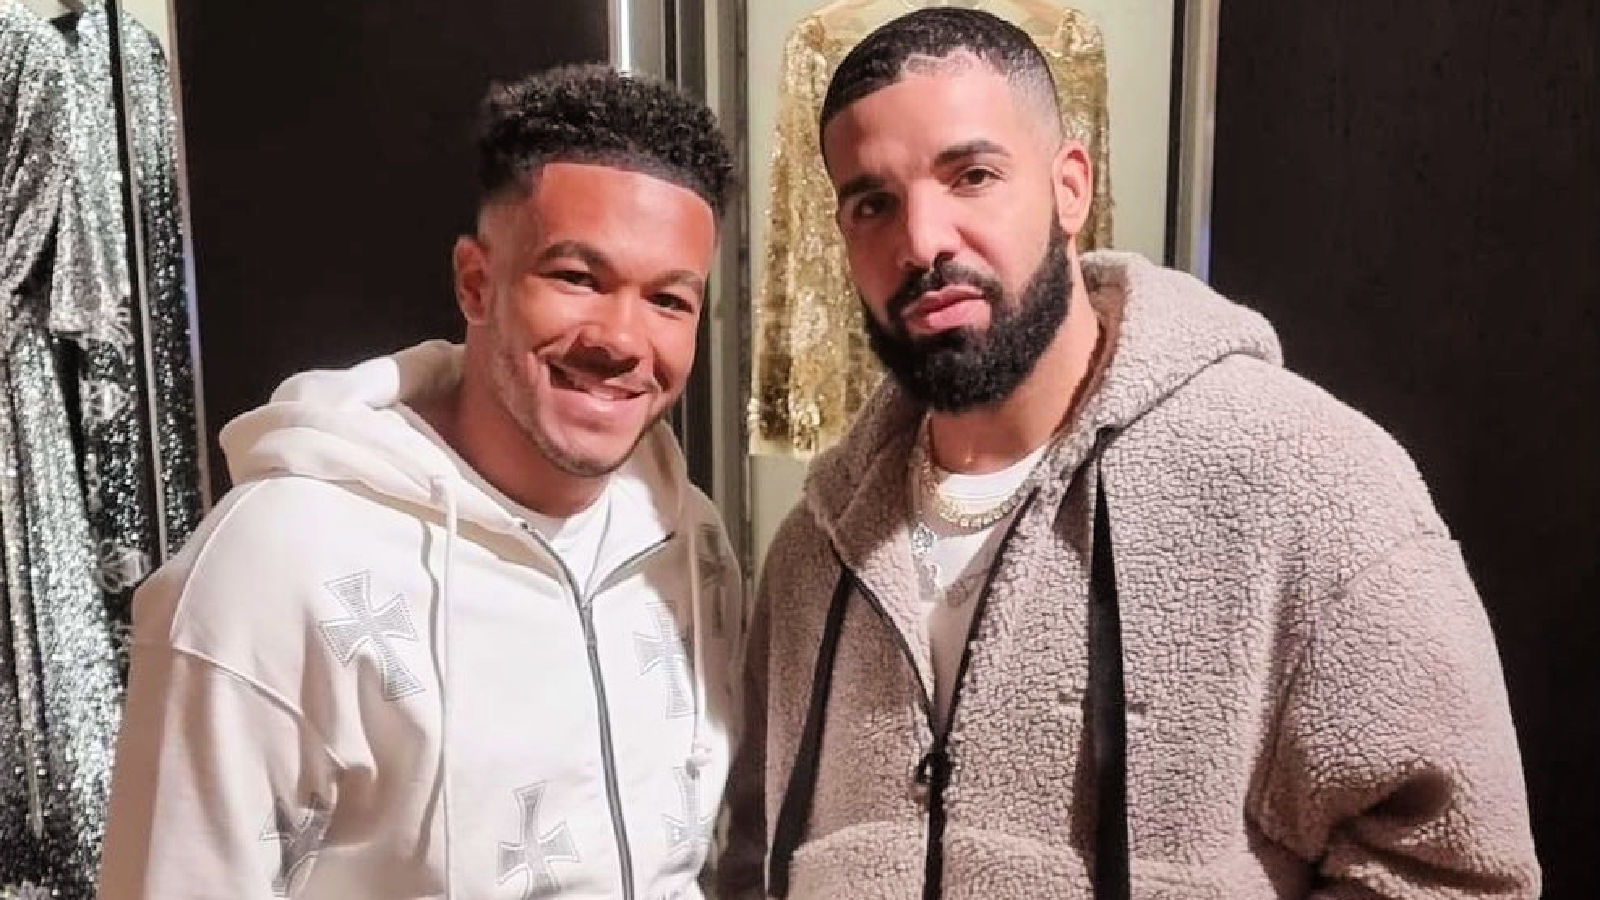 Chelsea fans wonder if the Drake curse will ruin their season after Reece James is pictured with superstar rapper